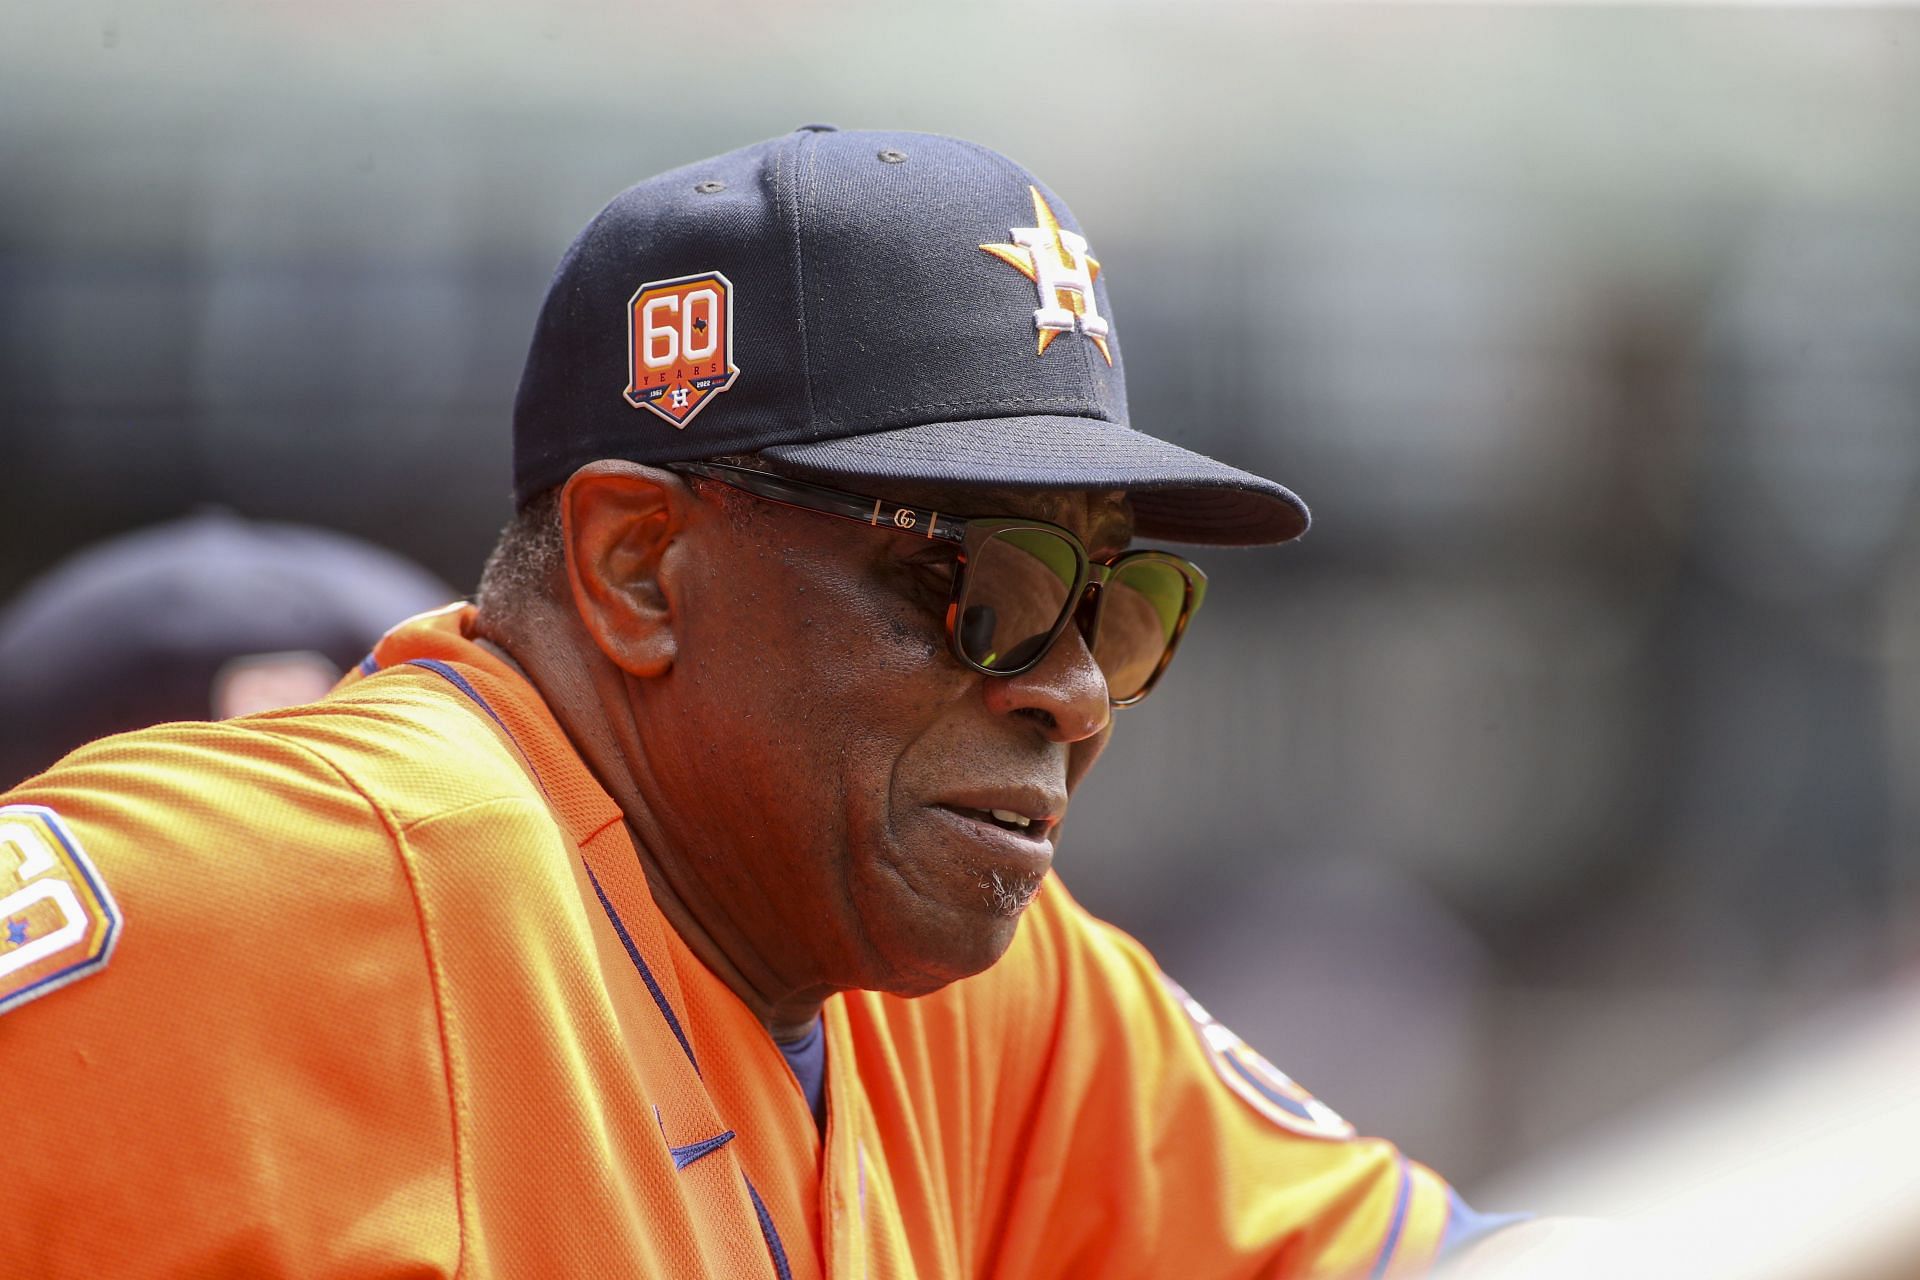 Dusty Baker has managed for decades